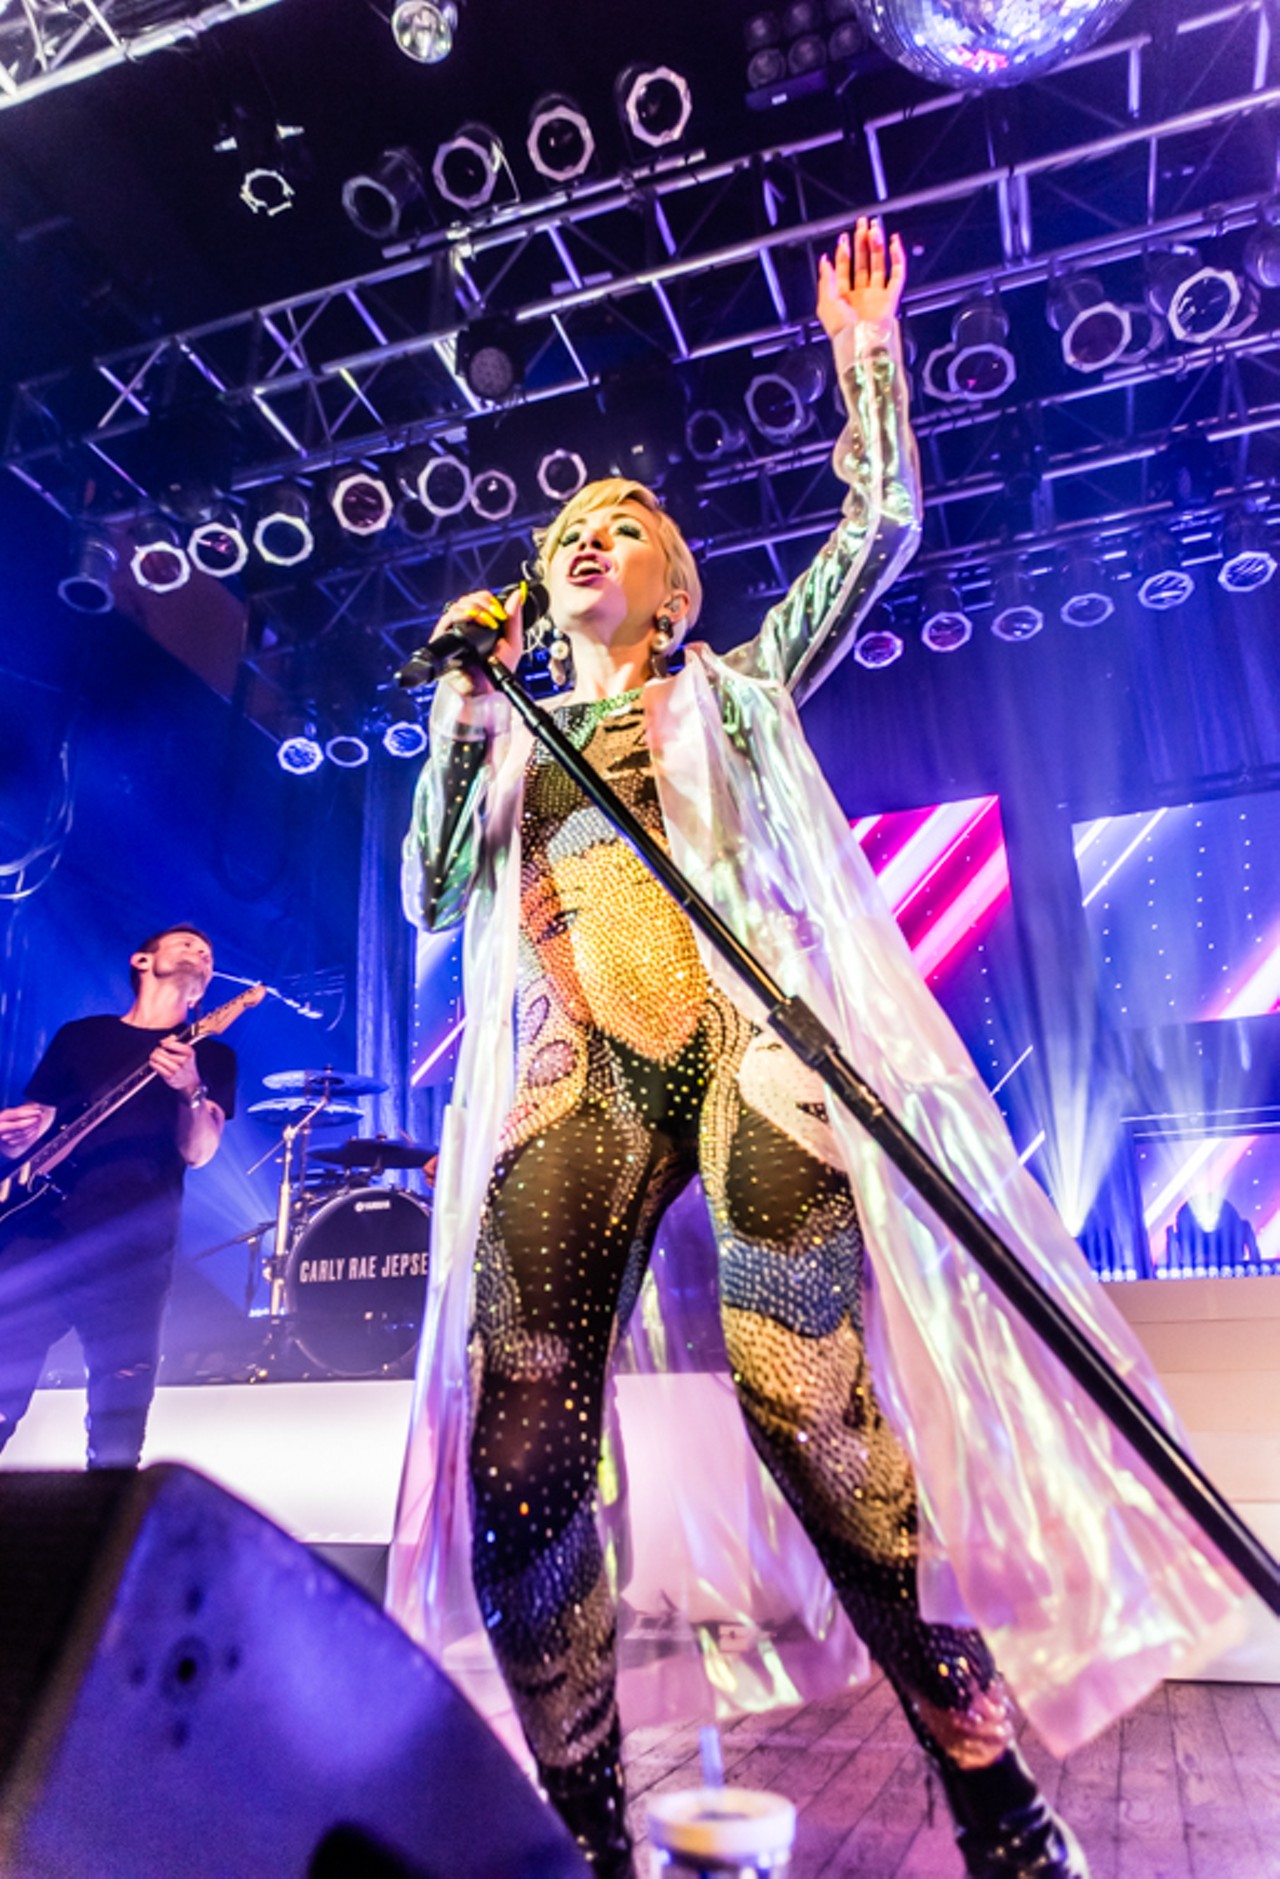 Photos From Carly Rae Jepsen's Concert at House of Blues